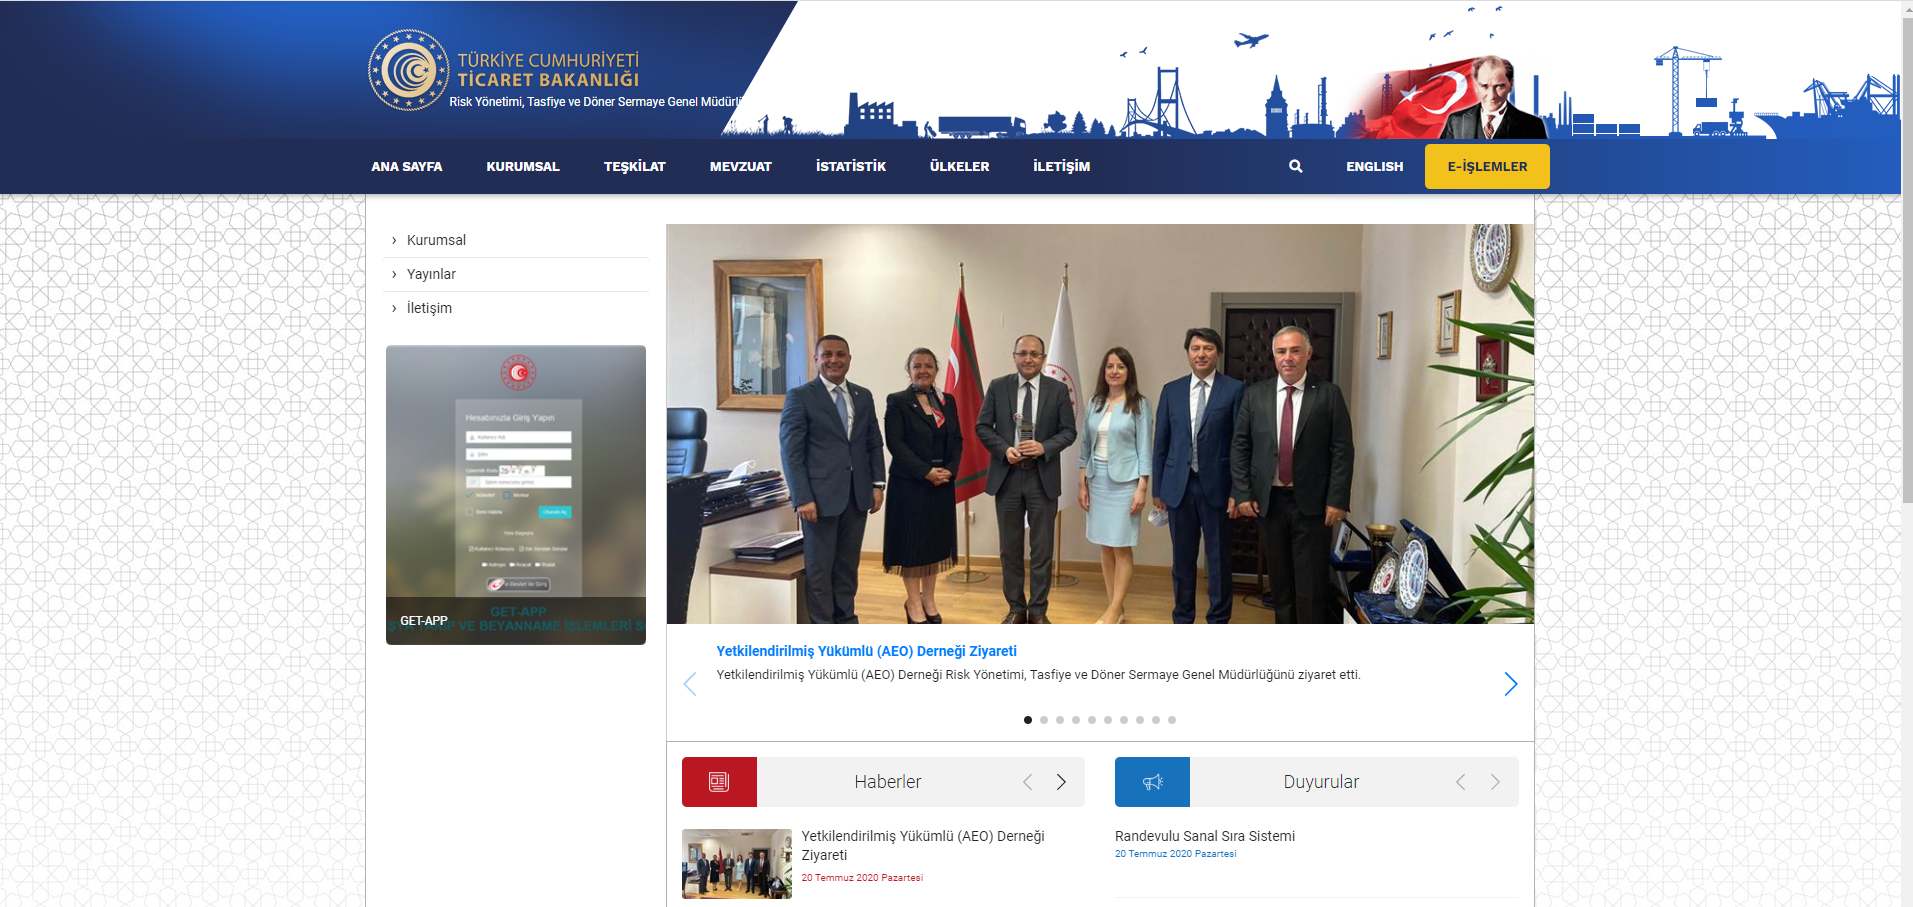 We took our place on the website of the Ministry of Trade, General Directorate of Risk Management, Liquidation and Revolving Fund.